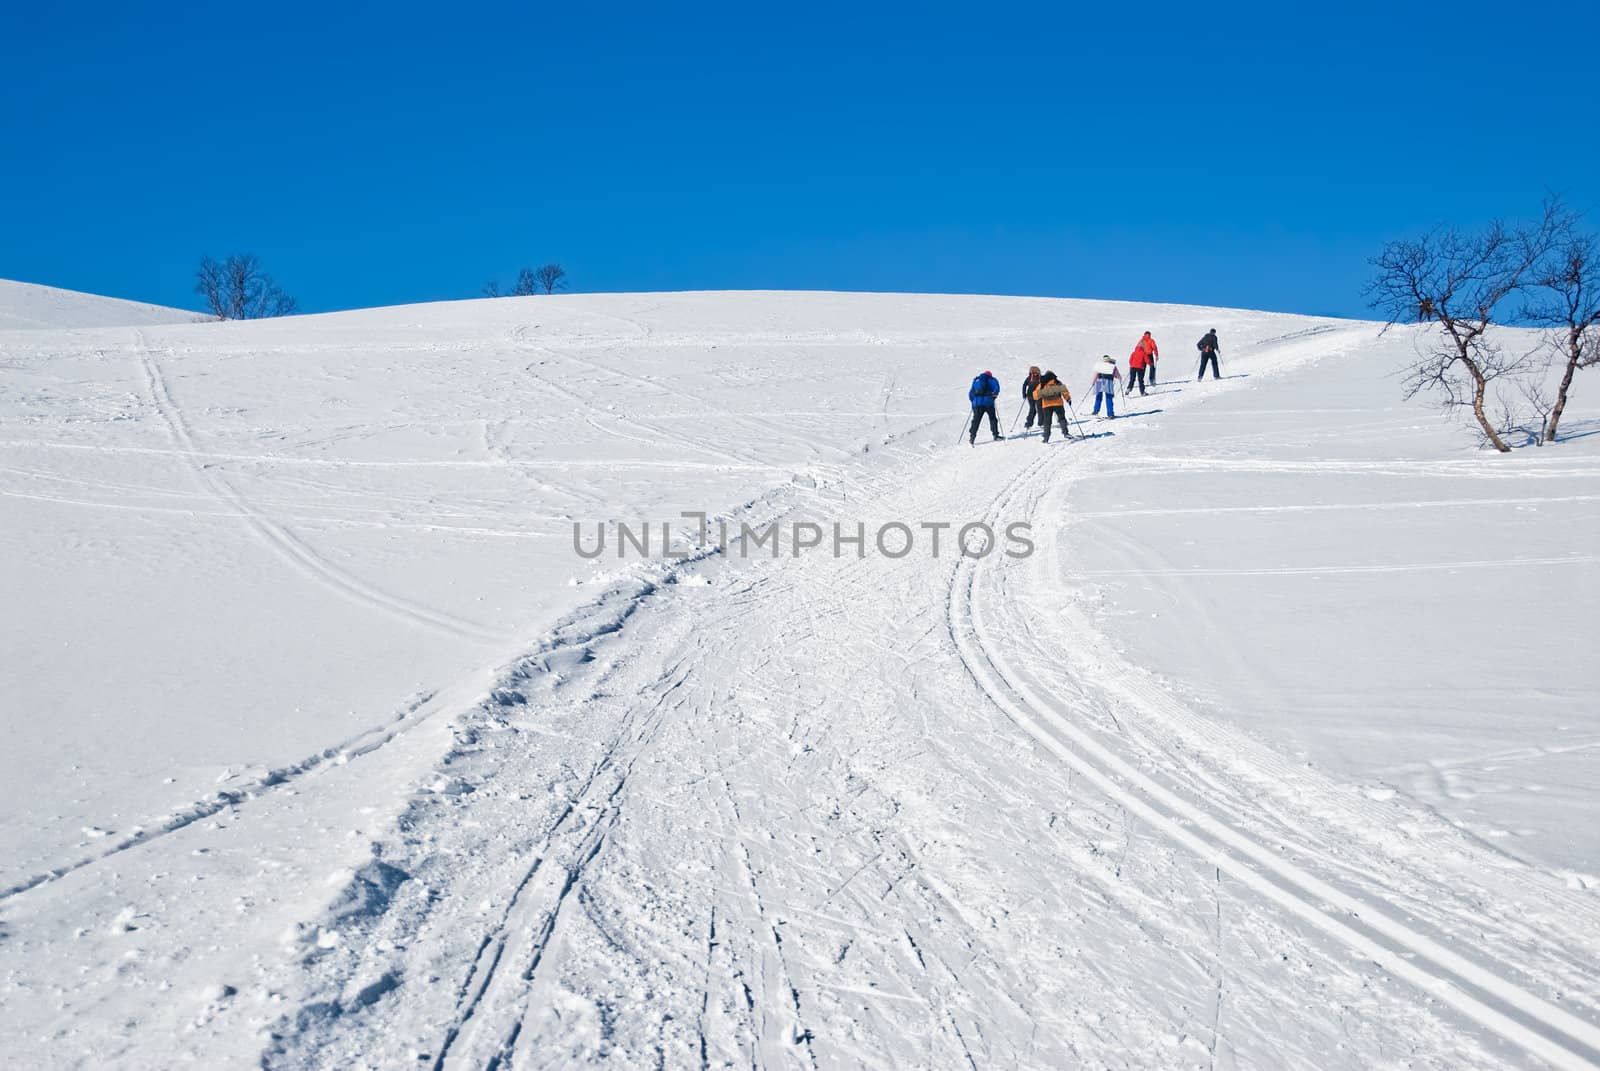 Skiing up the hill 1 by frodelil